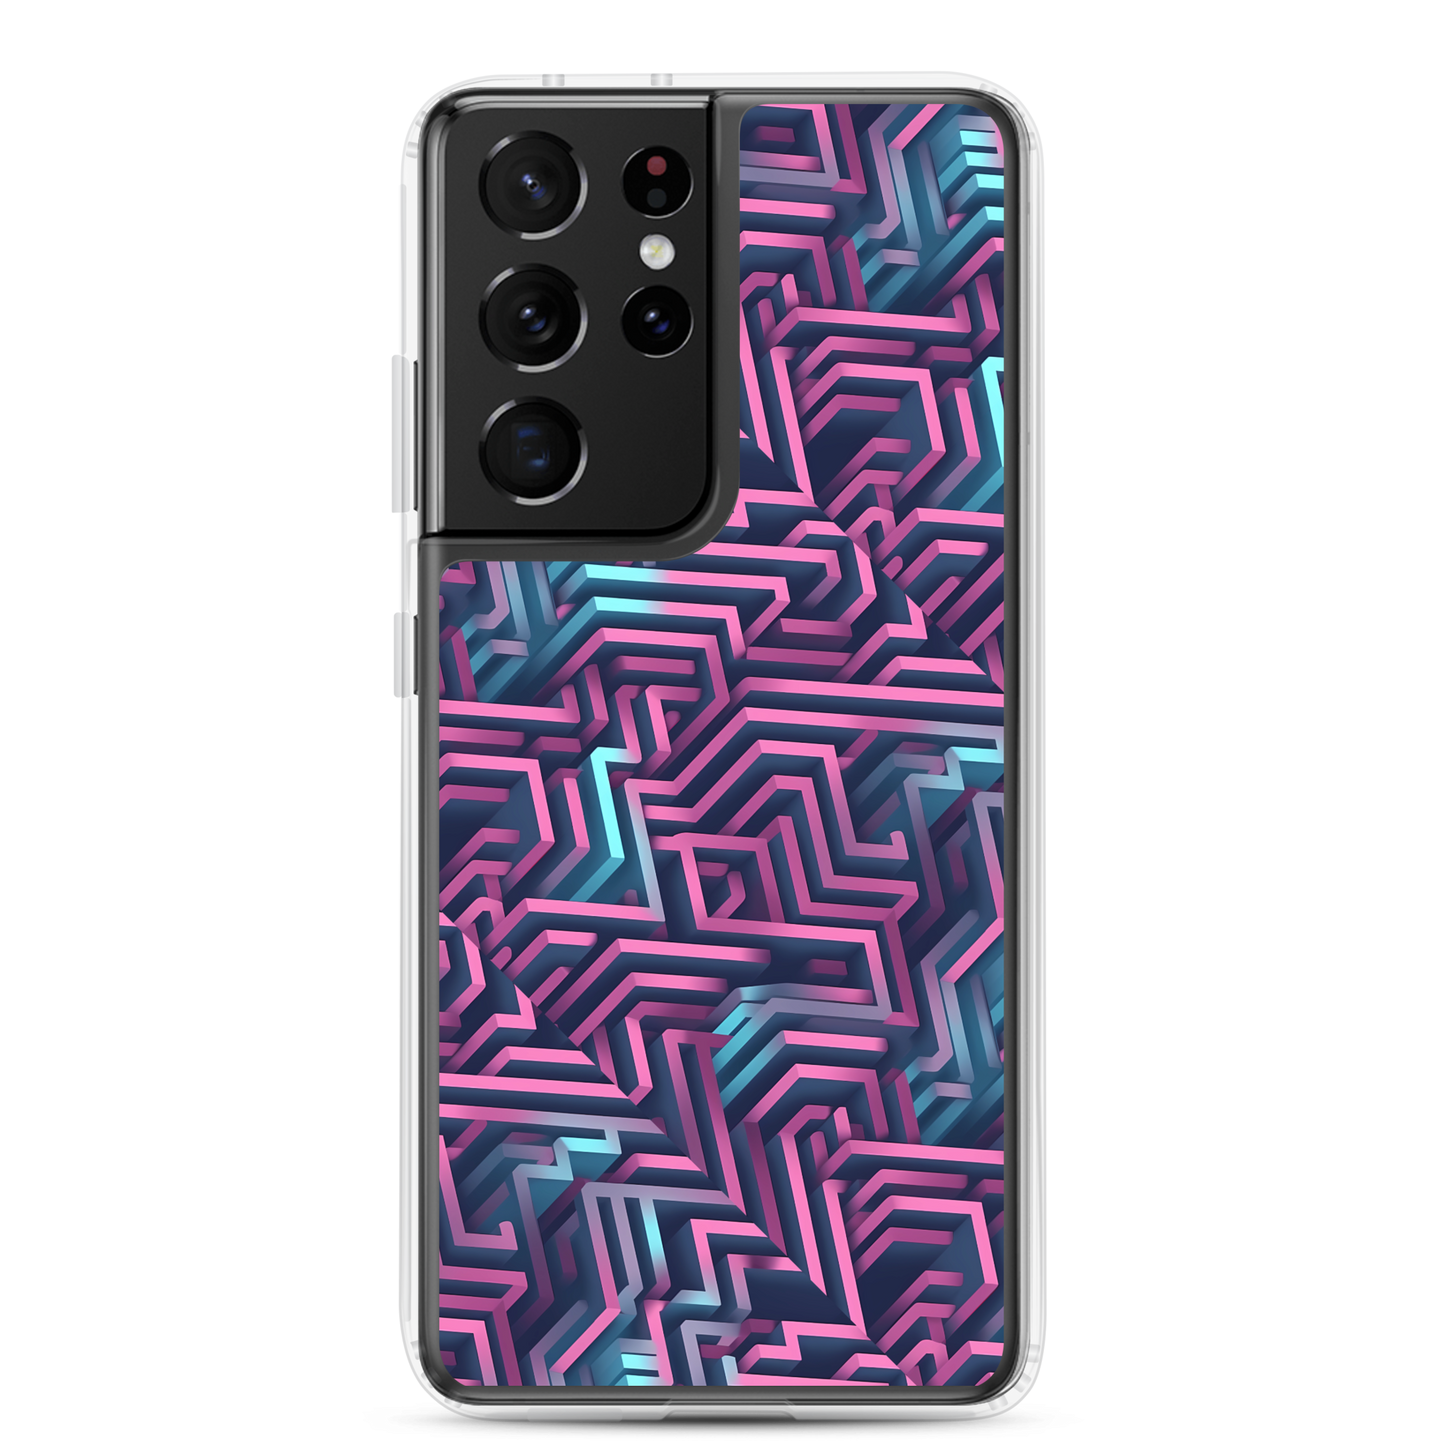 3D Maze Illusion | 3D Patterns | Clear Case for Samsung - #4